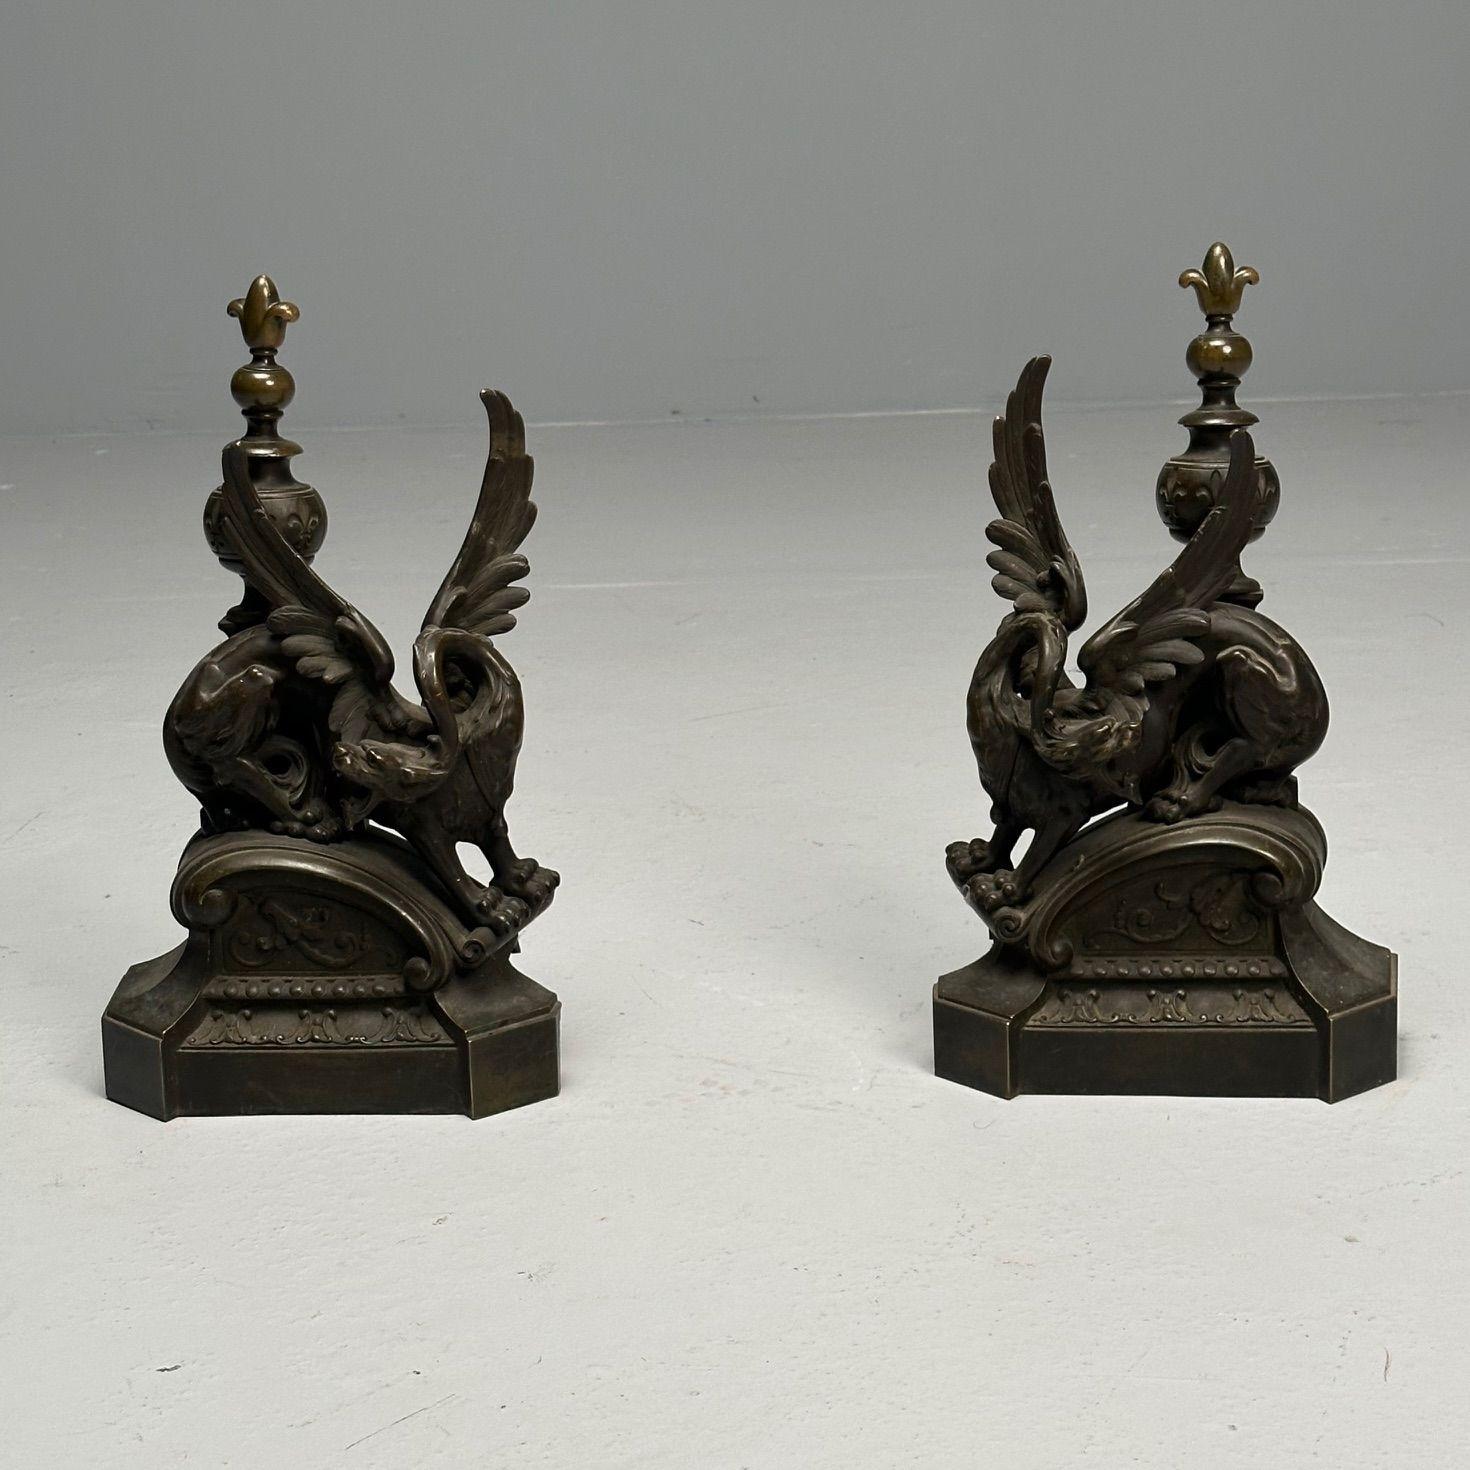 Pair of Bronze Winged Griffin Andirons, Figural, 19th/20th Century


A pair of finely detailed andirons each having an opposing winged griffin guarding the gates of the palace. Late 19th to early 20th century.


H 19
W 11
D 4.5